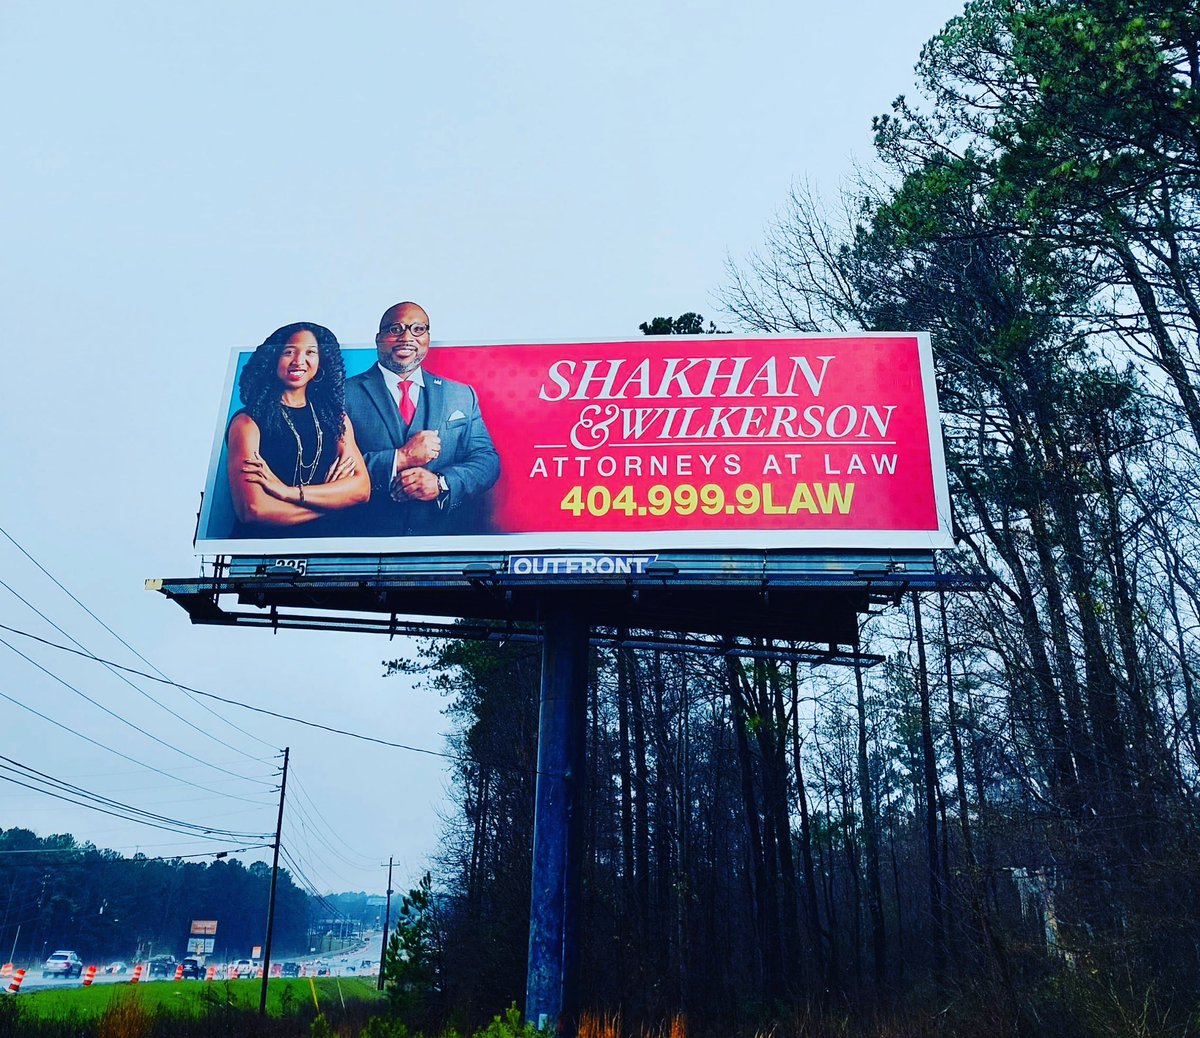 Are we in these #Georgia #streets❓Why yes we are. Do we take #familylaw cases, #criminallaw cases and some #estateplanning matters❓Affirmative 👍🏾 

We #proudly serve all counties in Georgia. Look for our #commercials or #billboards in your #neckofthewoods 😊